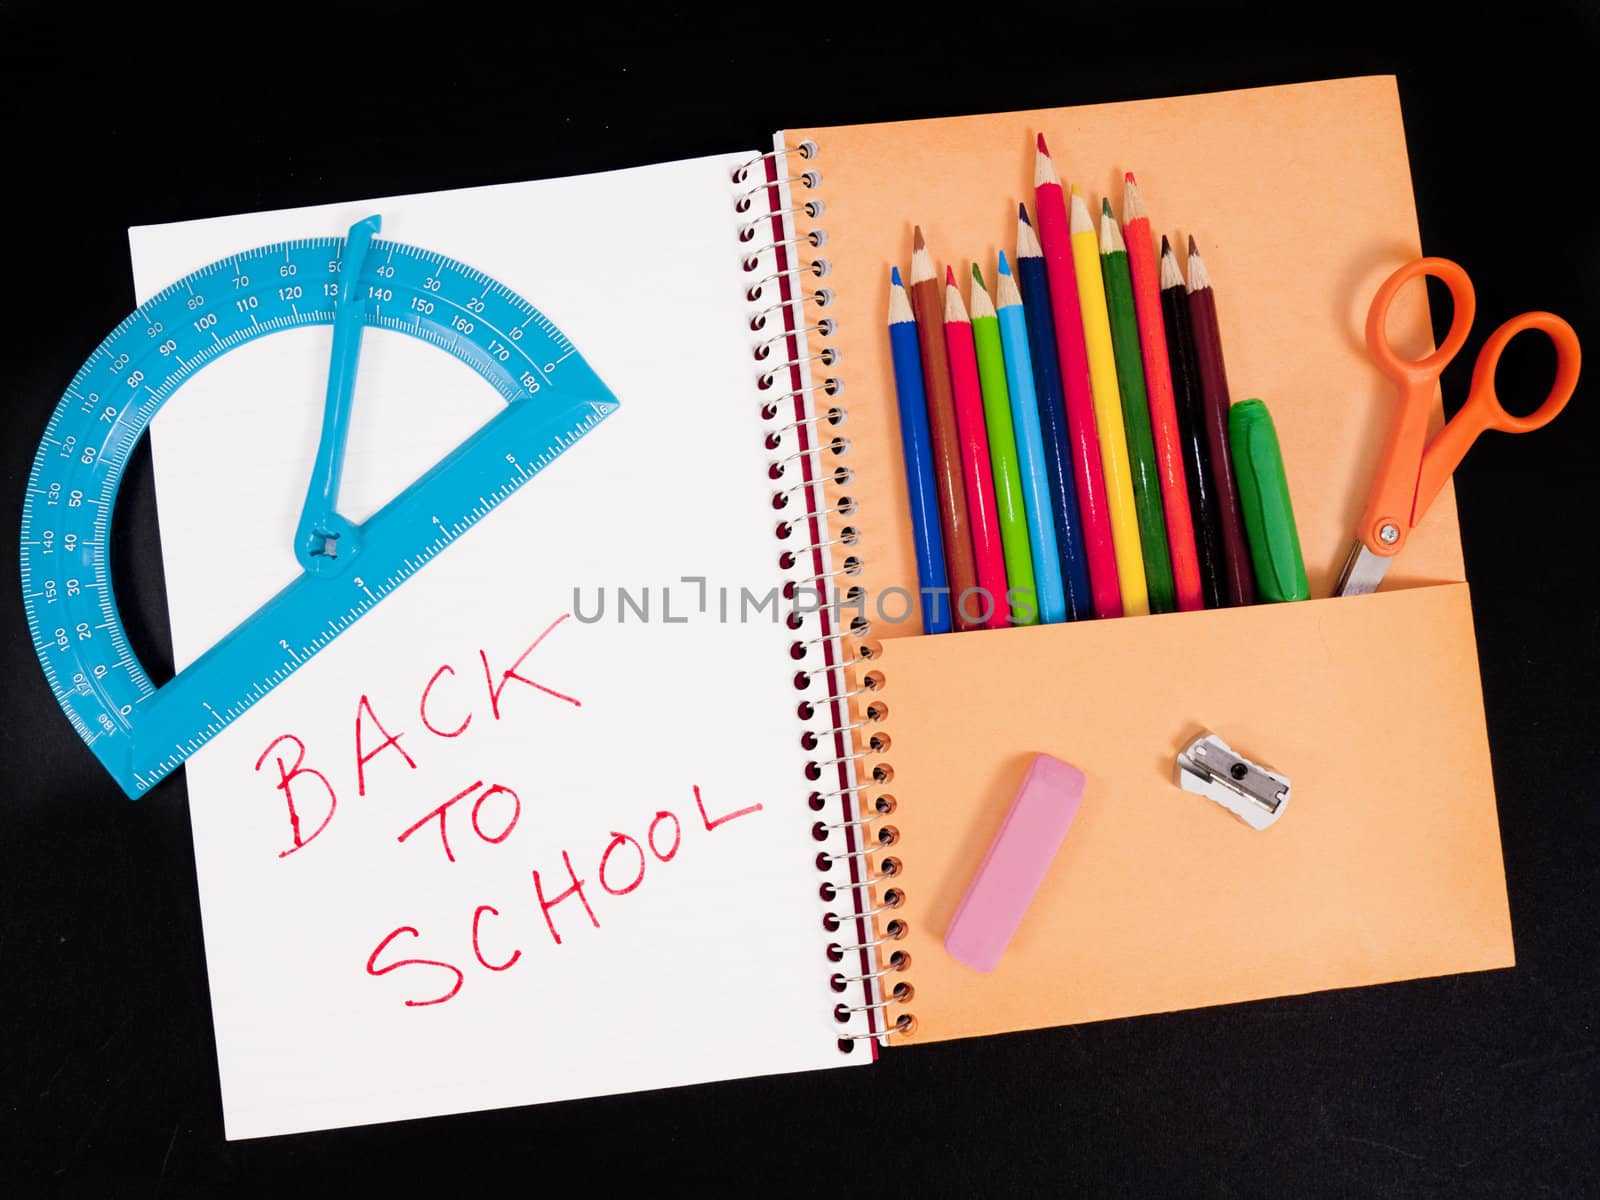 Back-to-school theme of student notebook with pocket full of colored pencils. Other items are scissors, protractor, sharpener, and eraser. Background is black.